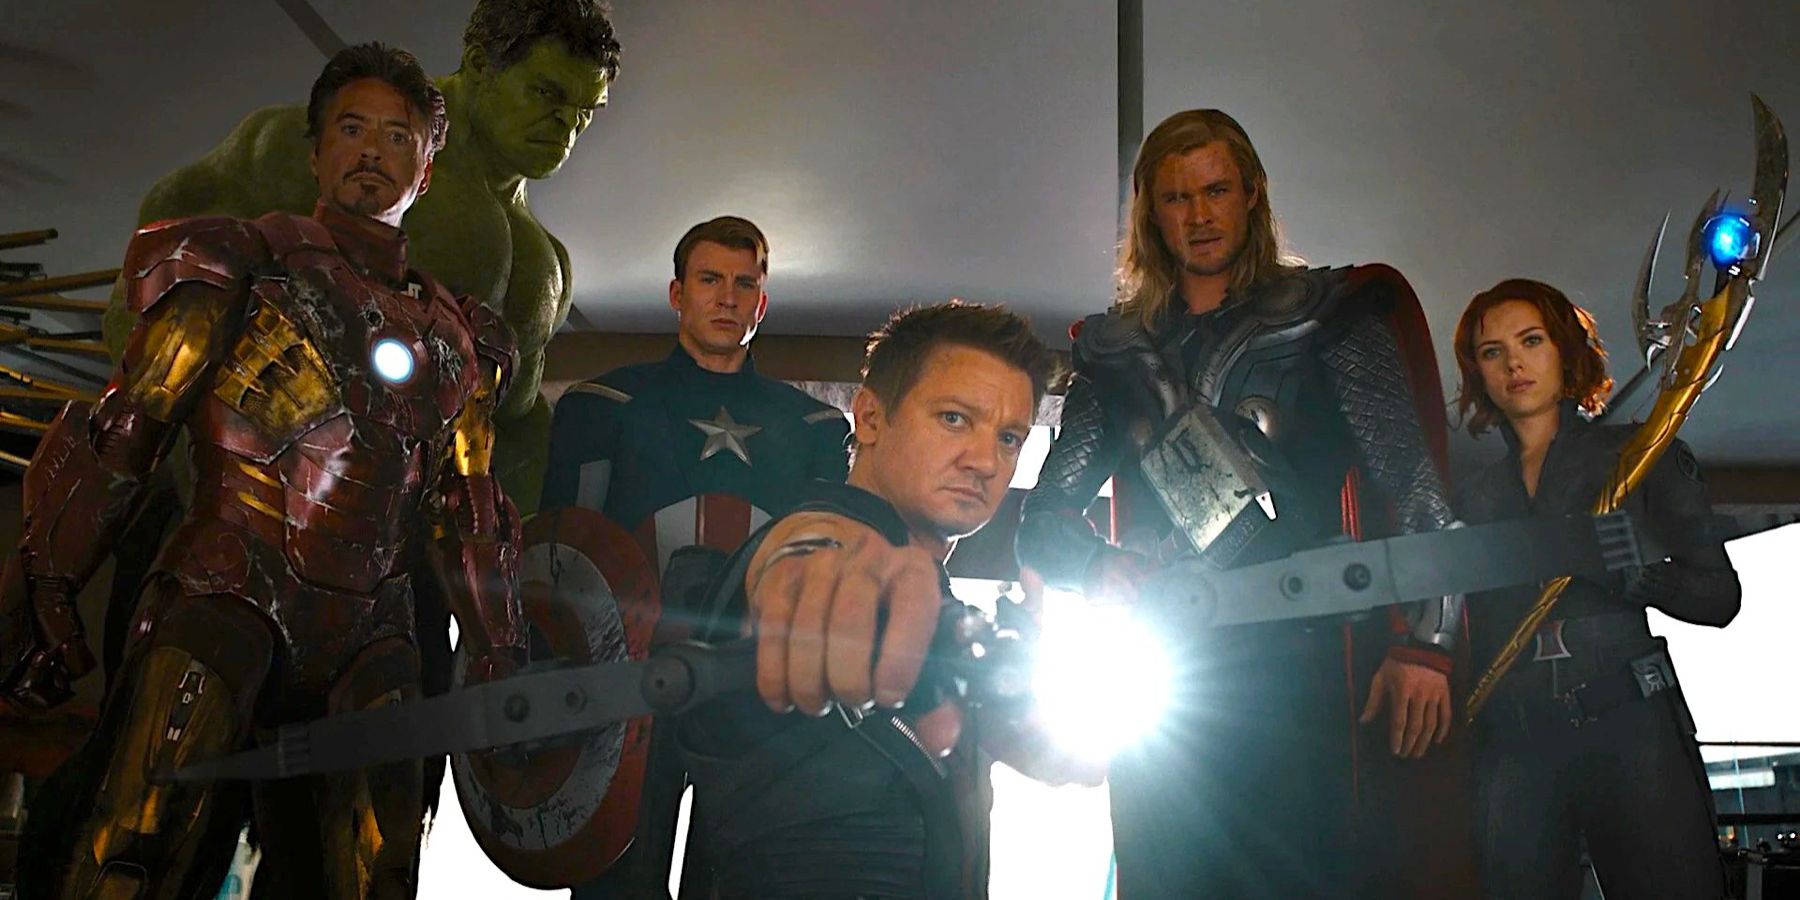 Iron Man (Robert Downey Jr.), Hulk (mark Ruffalo), Captain America (Chris Evans), Hawkeye (Jeremy Renner), Thor (Chris Hemsworth) and Black Widow (Scarlett Johansson), stand heroically in the wreckage of Stark Tower, staring down at the camera in The Avengers.